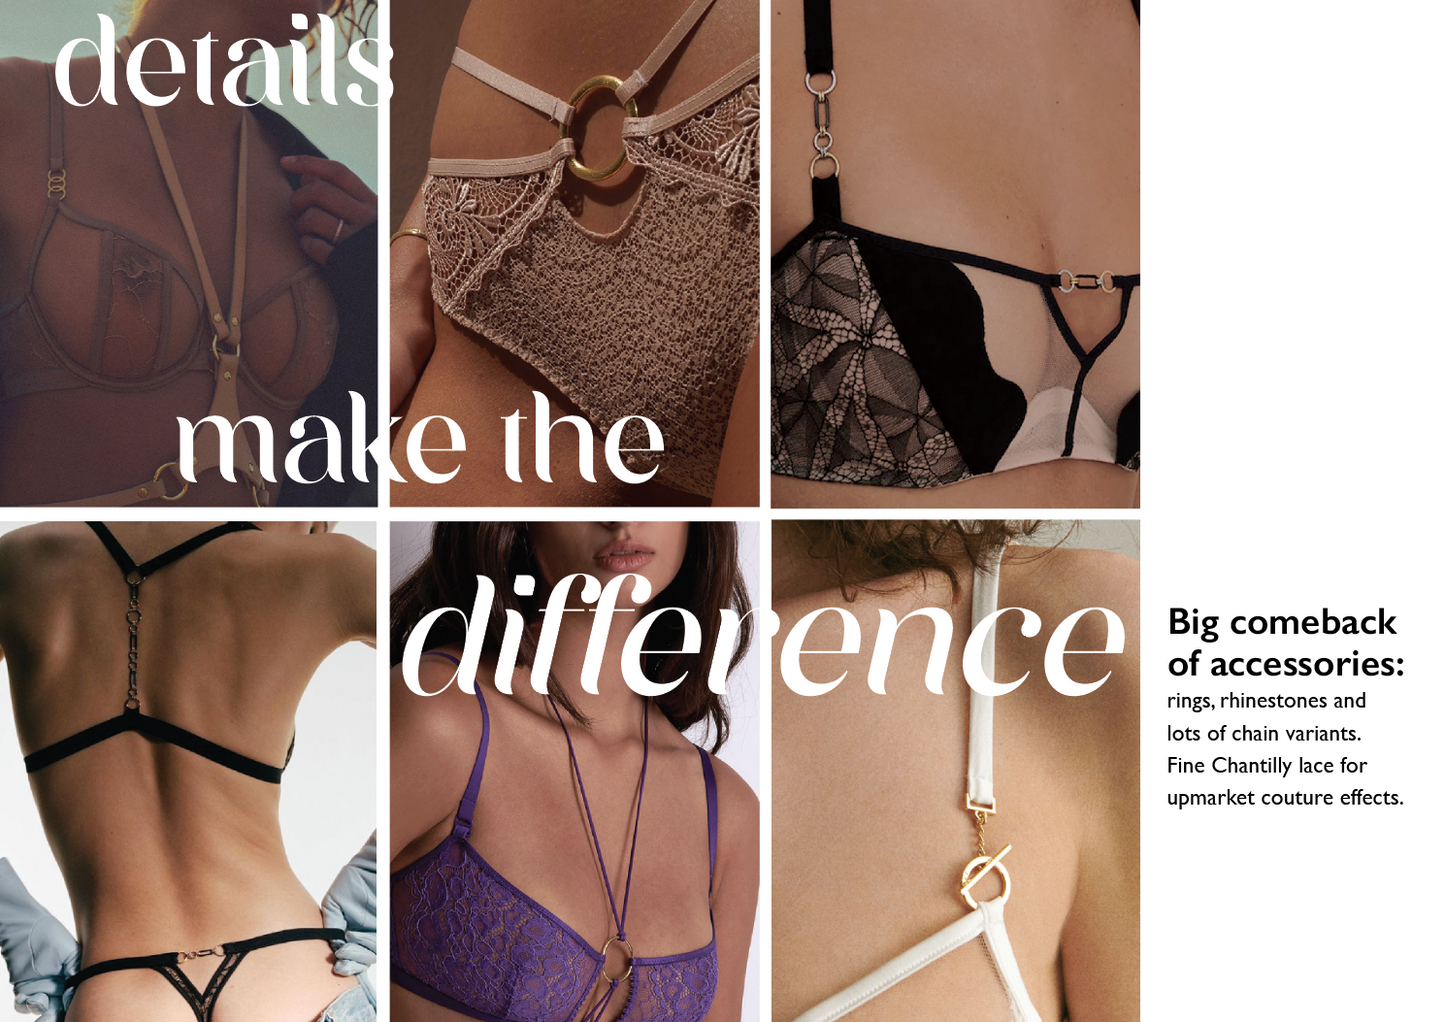 Design Concepts SS25 Lingerie & Loungewear - YEAR SUBSCRIPTION